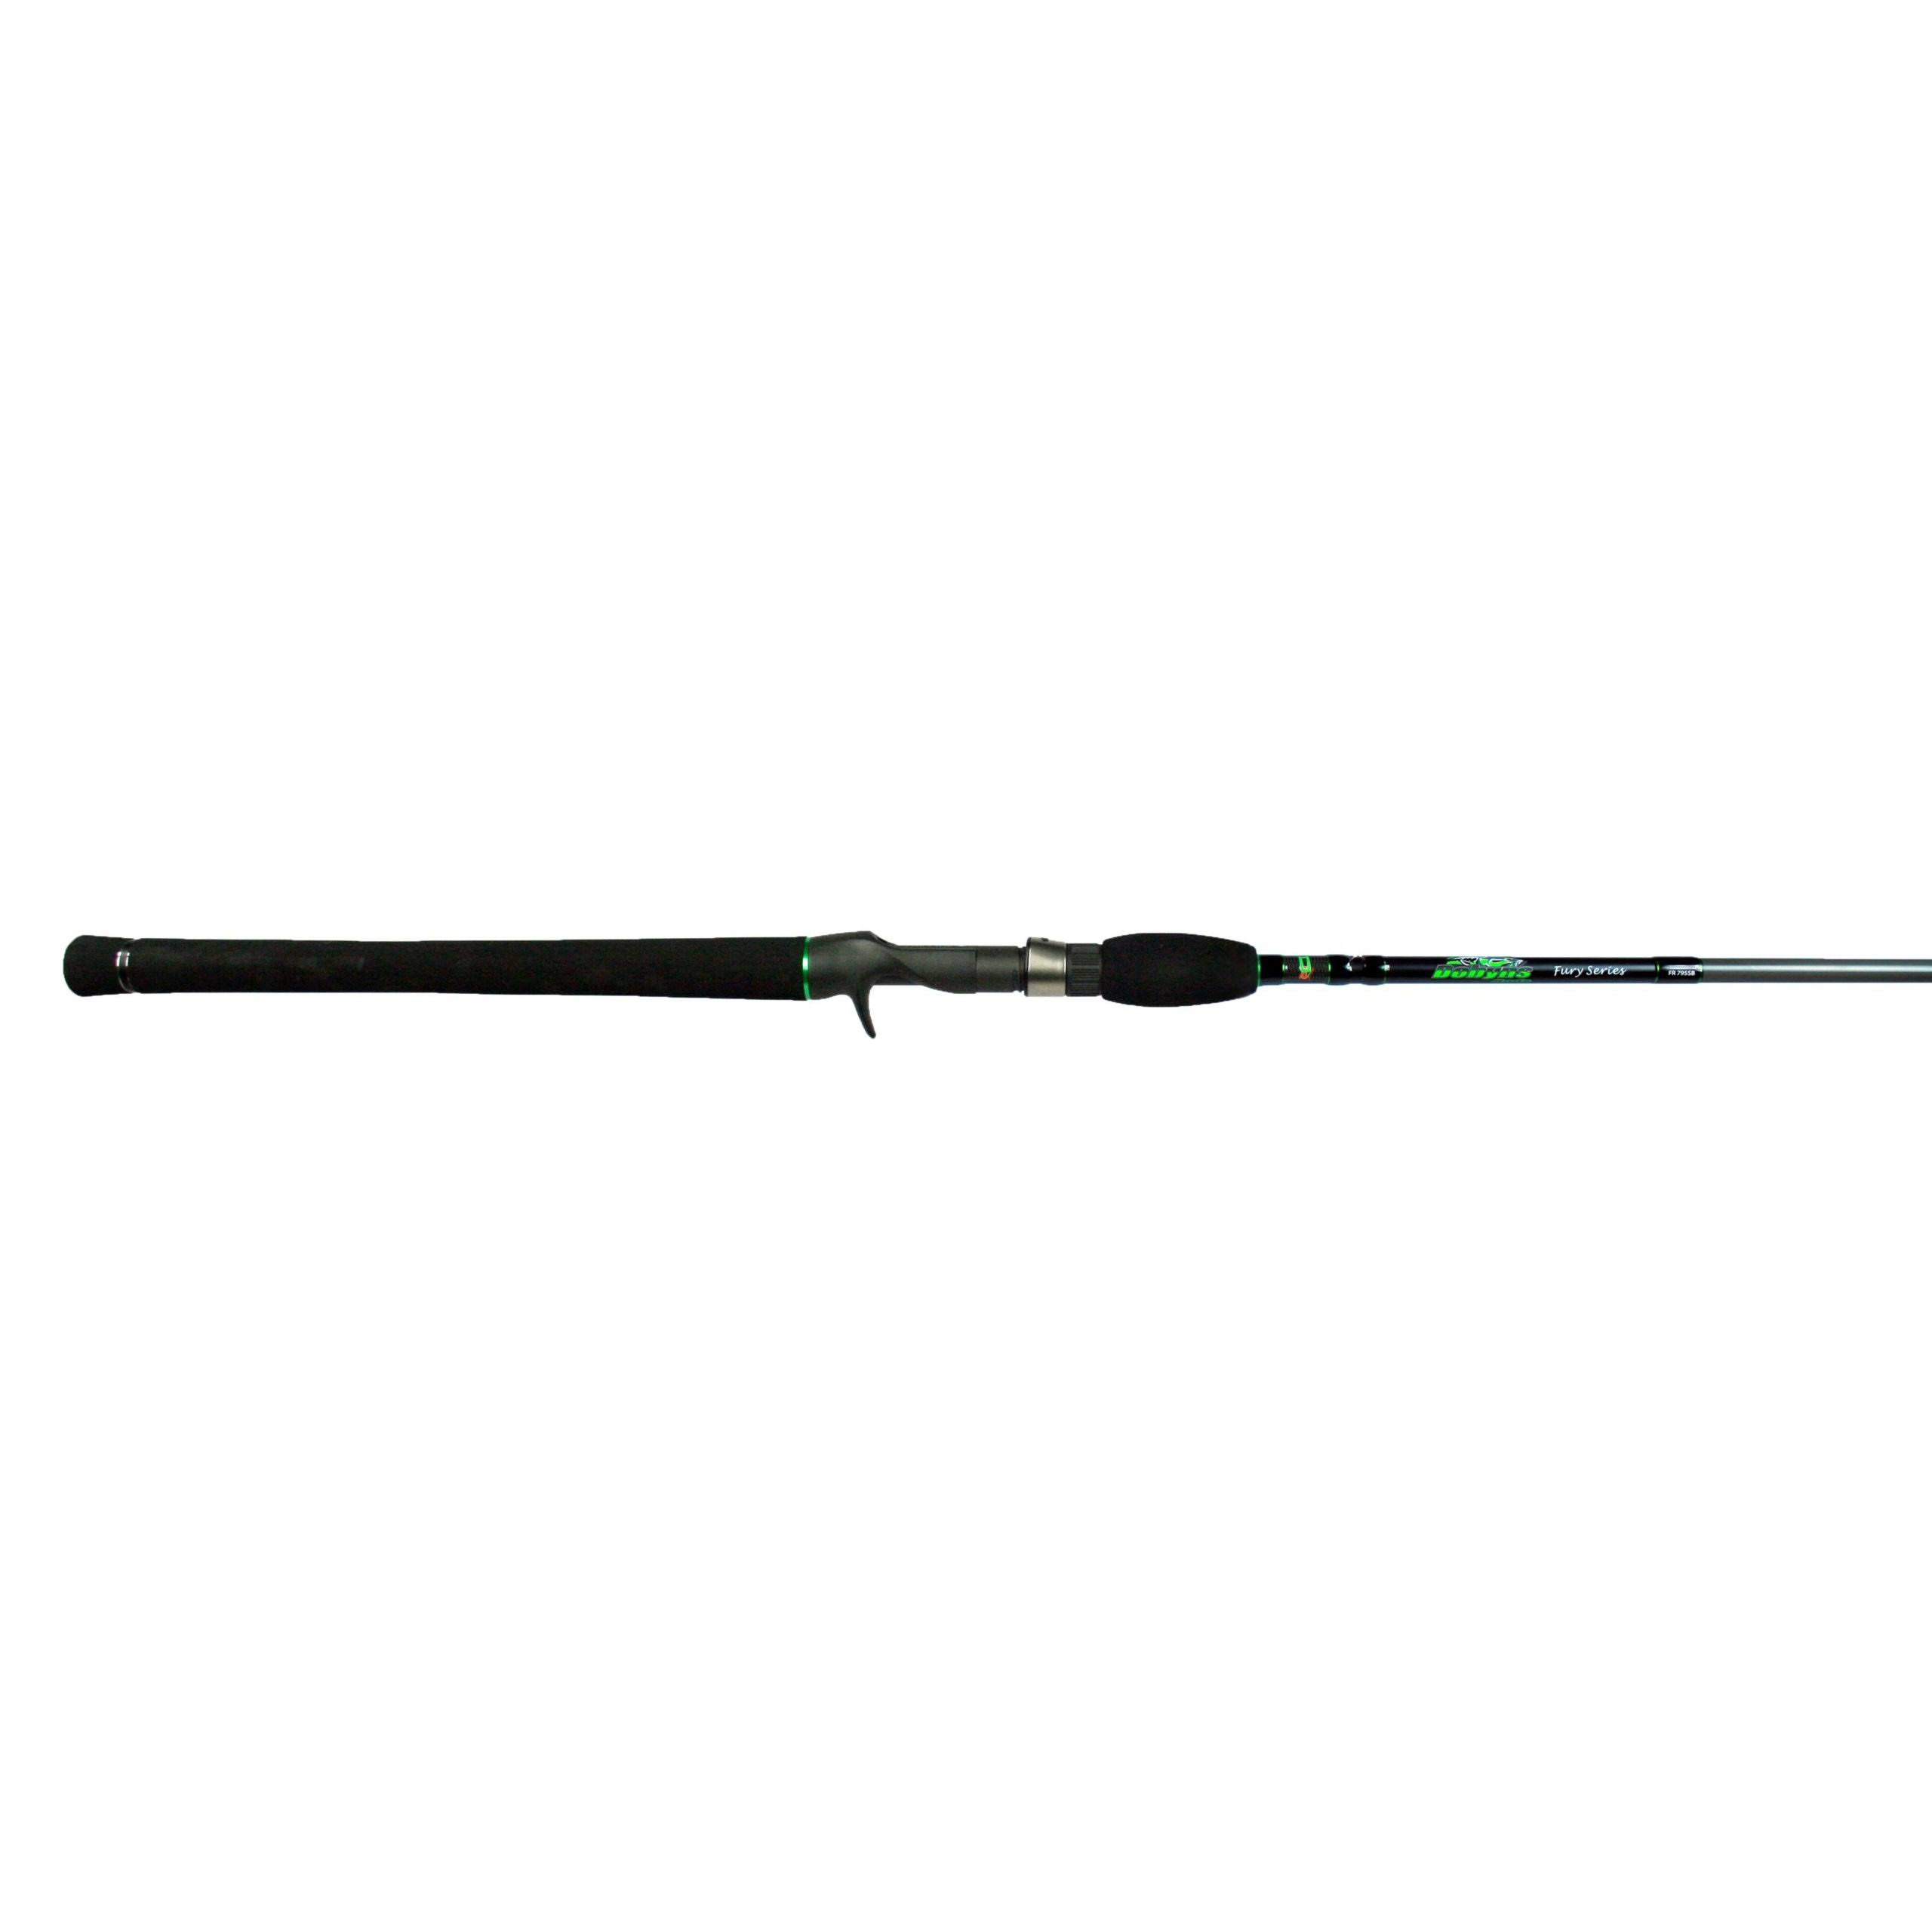 Dobyns Rods Fury Series 8’0” Casting Fishing Rod | FR806HSB | Heavy Fast Action Rod | Modulus Graphite Blank With Kevlar Wrapping | Fuji Reel Seats |